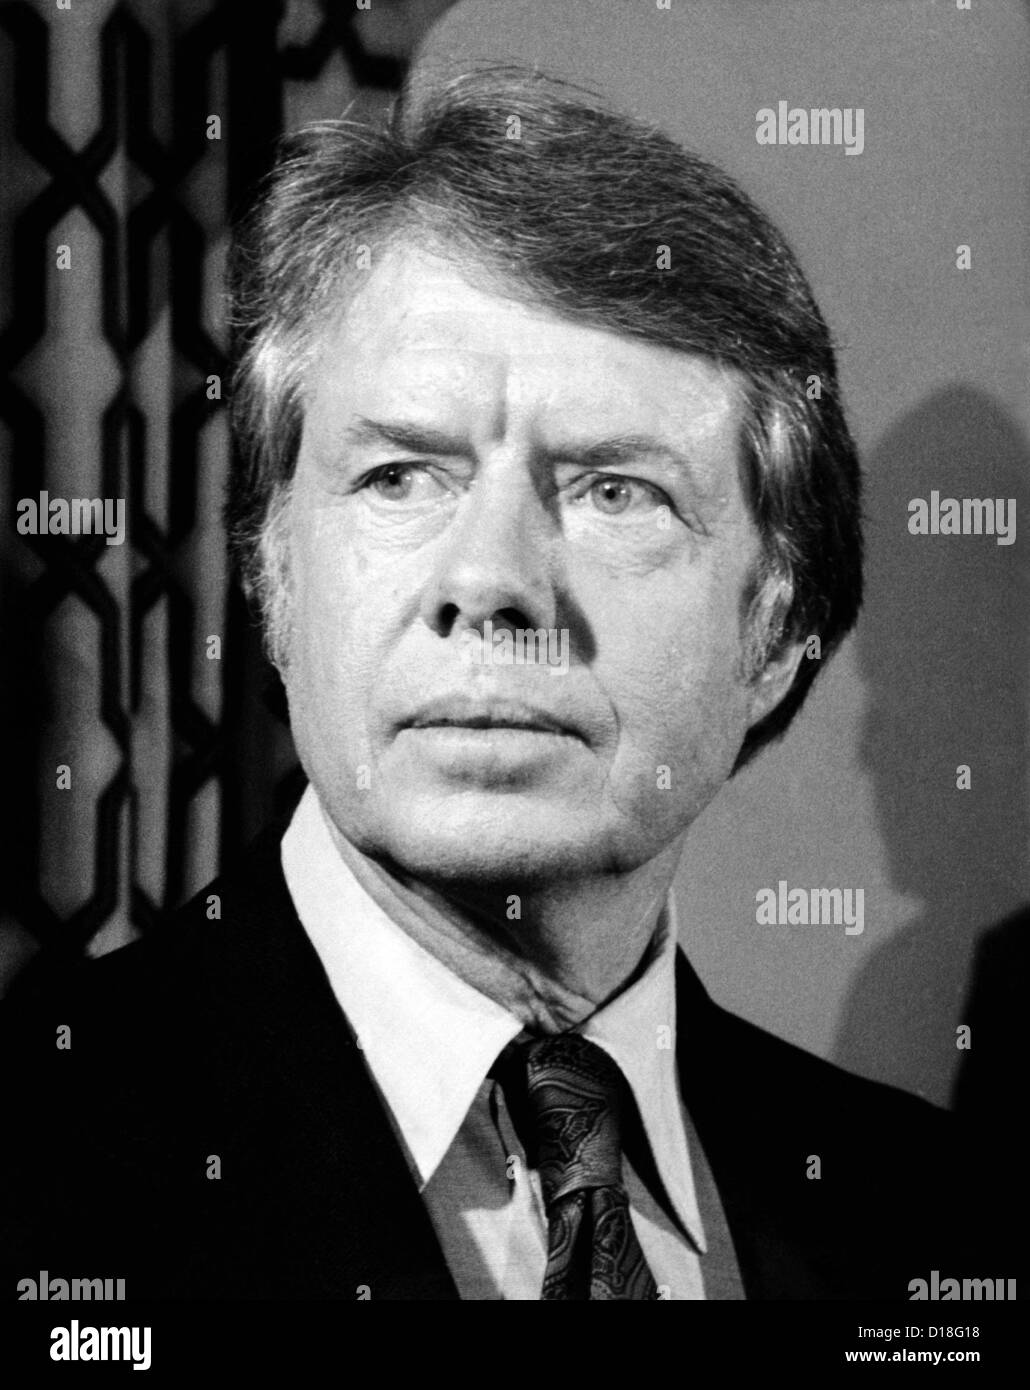 Georgia Governor Jimmy Carter during the his Democratic Primary campaign. March 21, 1976. (CSU ALPHA 429) CSU Archives/Everett Stock Photo